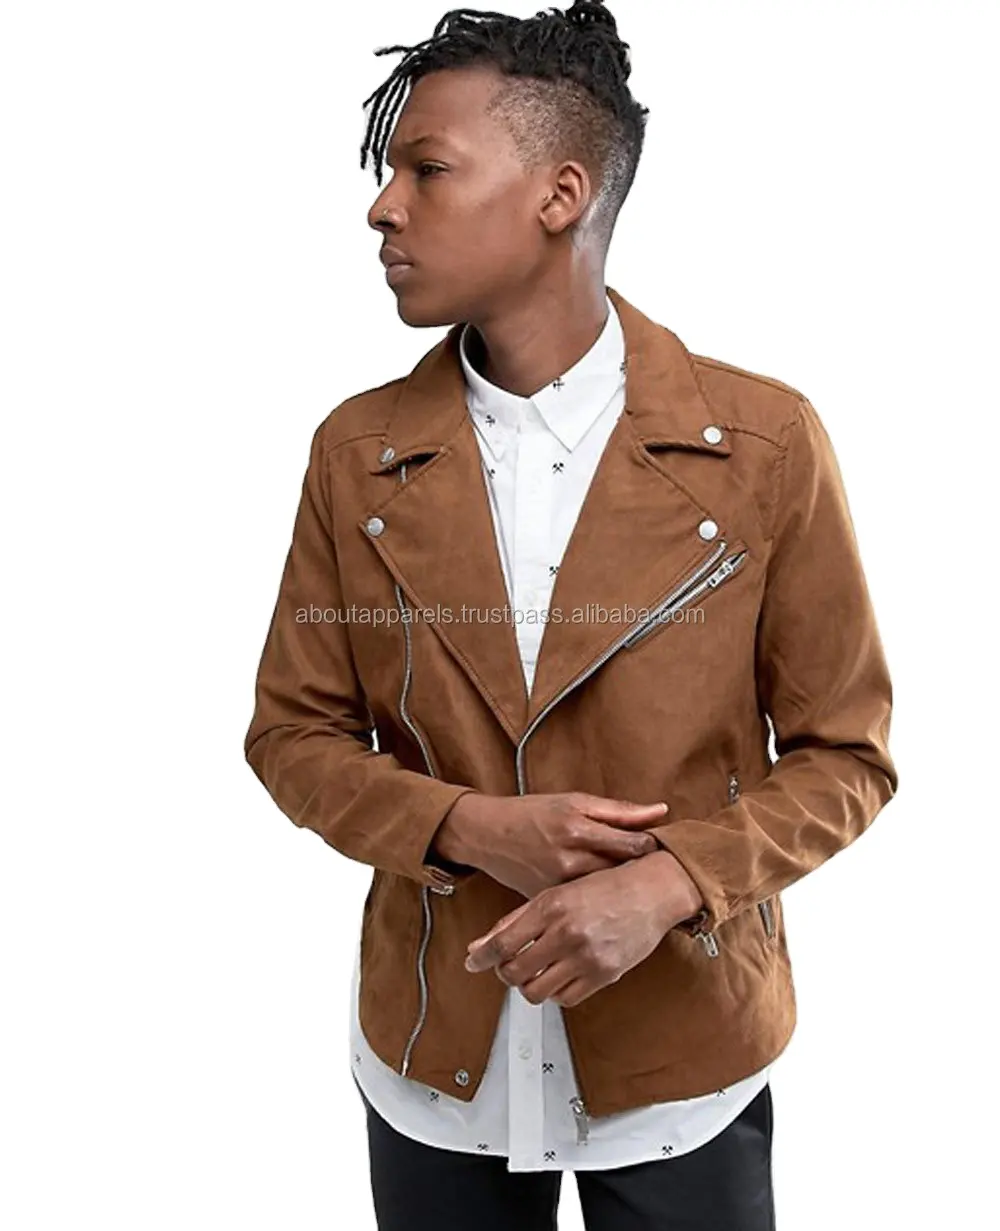 New Arrival Cheap Stylish High quality 100% Goat Suede Leather zipper jacket genuine suede motorbike Leather Jacket coat